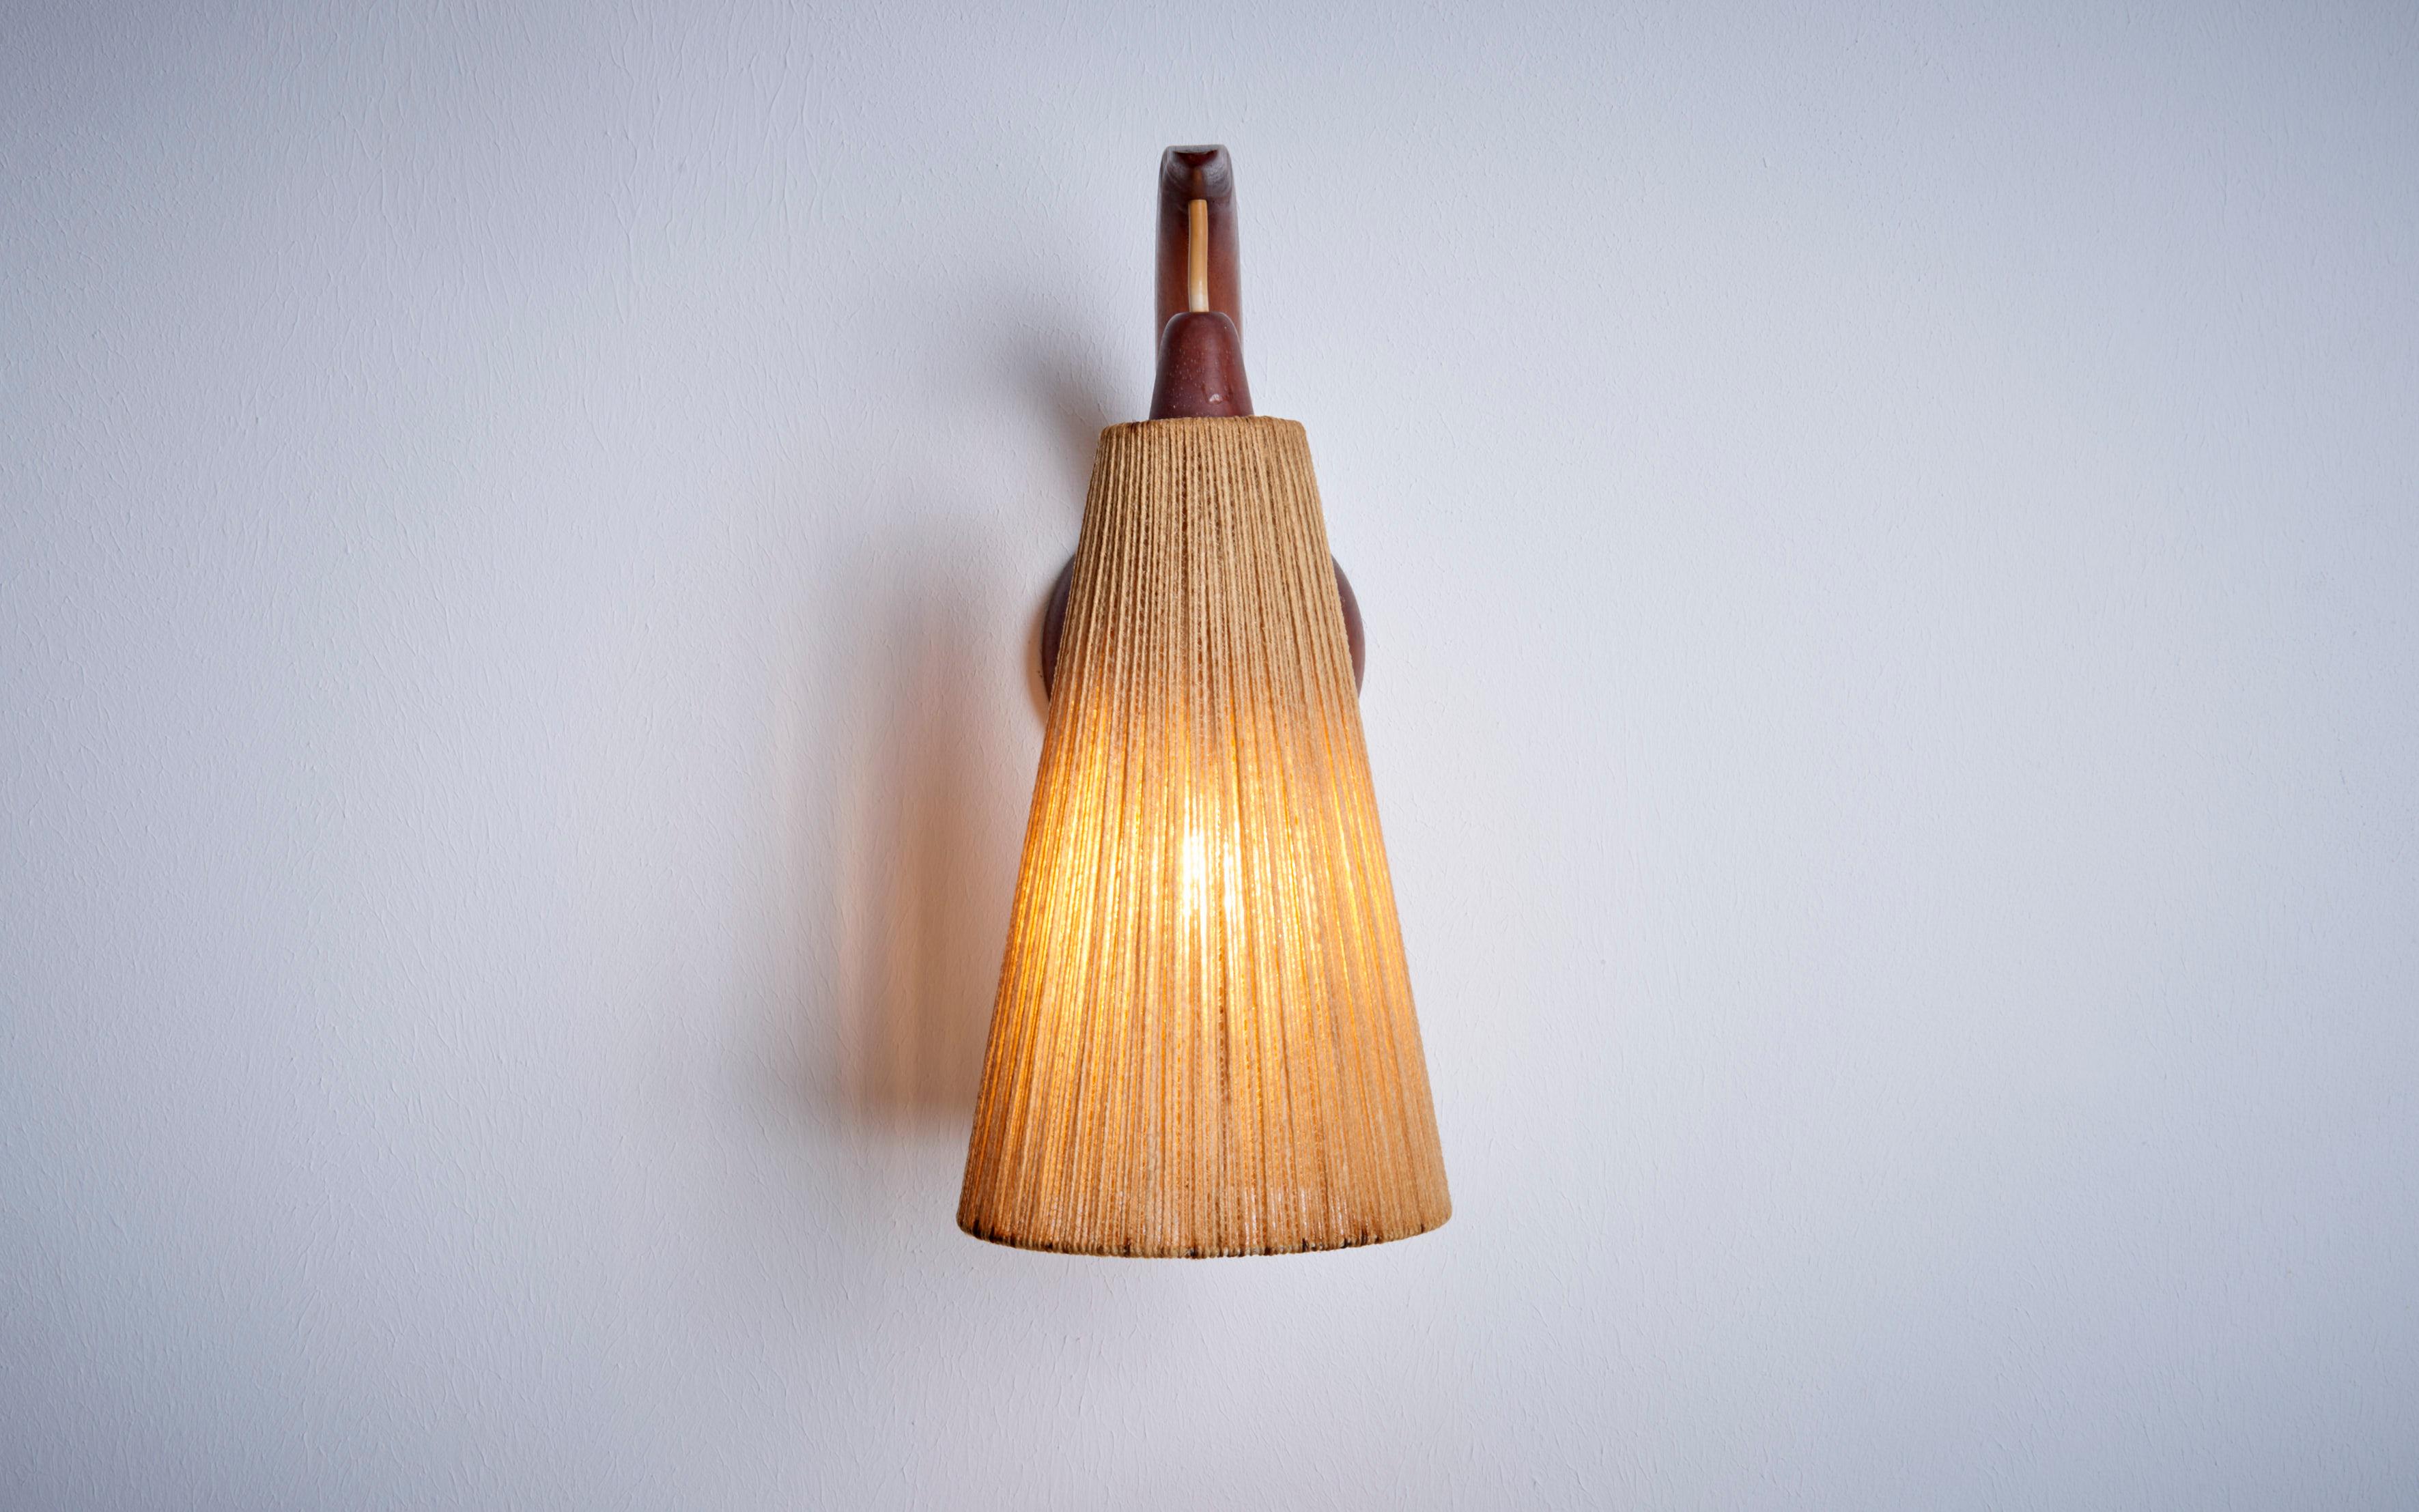 Mid-Century Modern Wall Lamp with Cord Shade by E.R. Nele for Temde, Switzerland